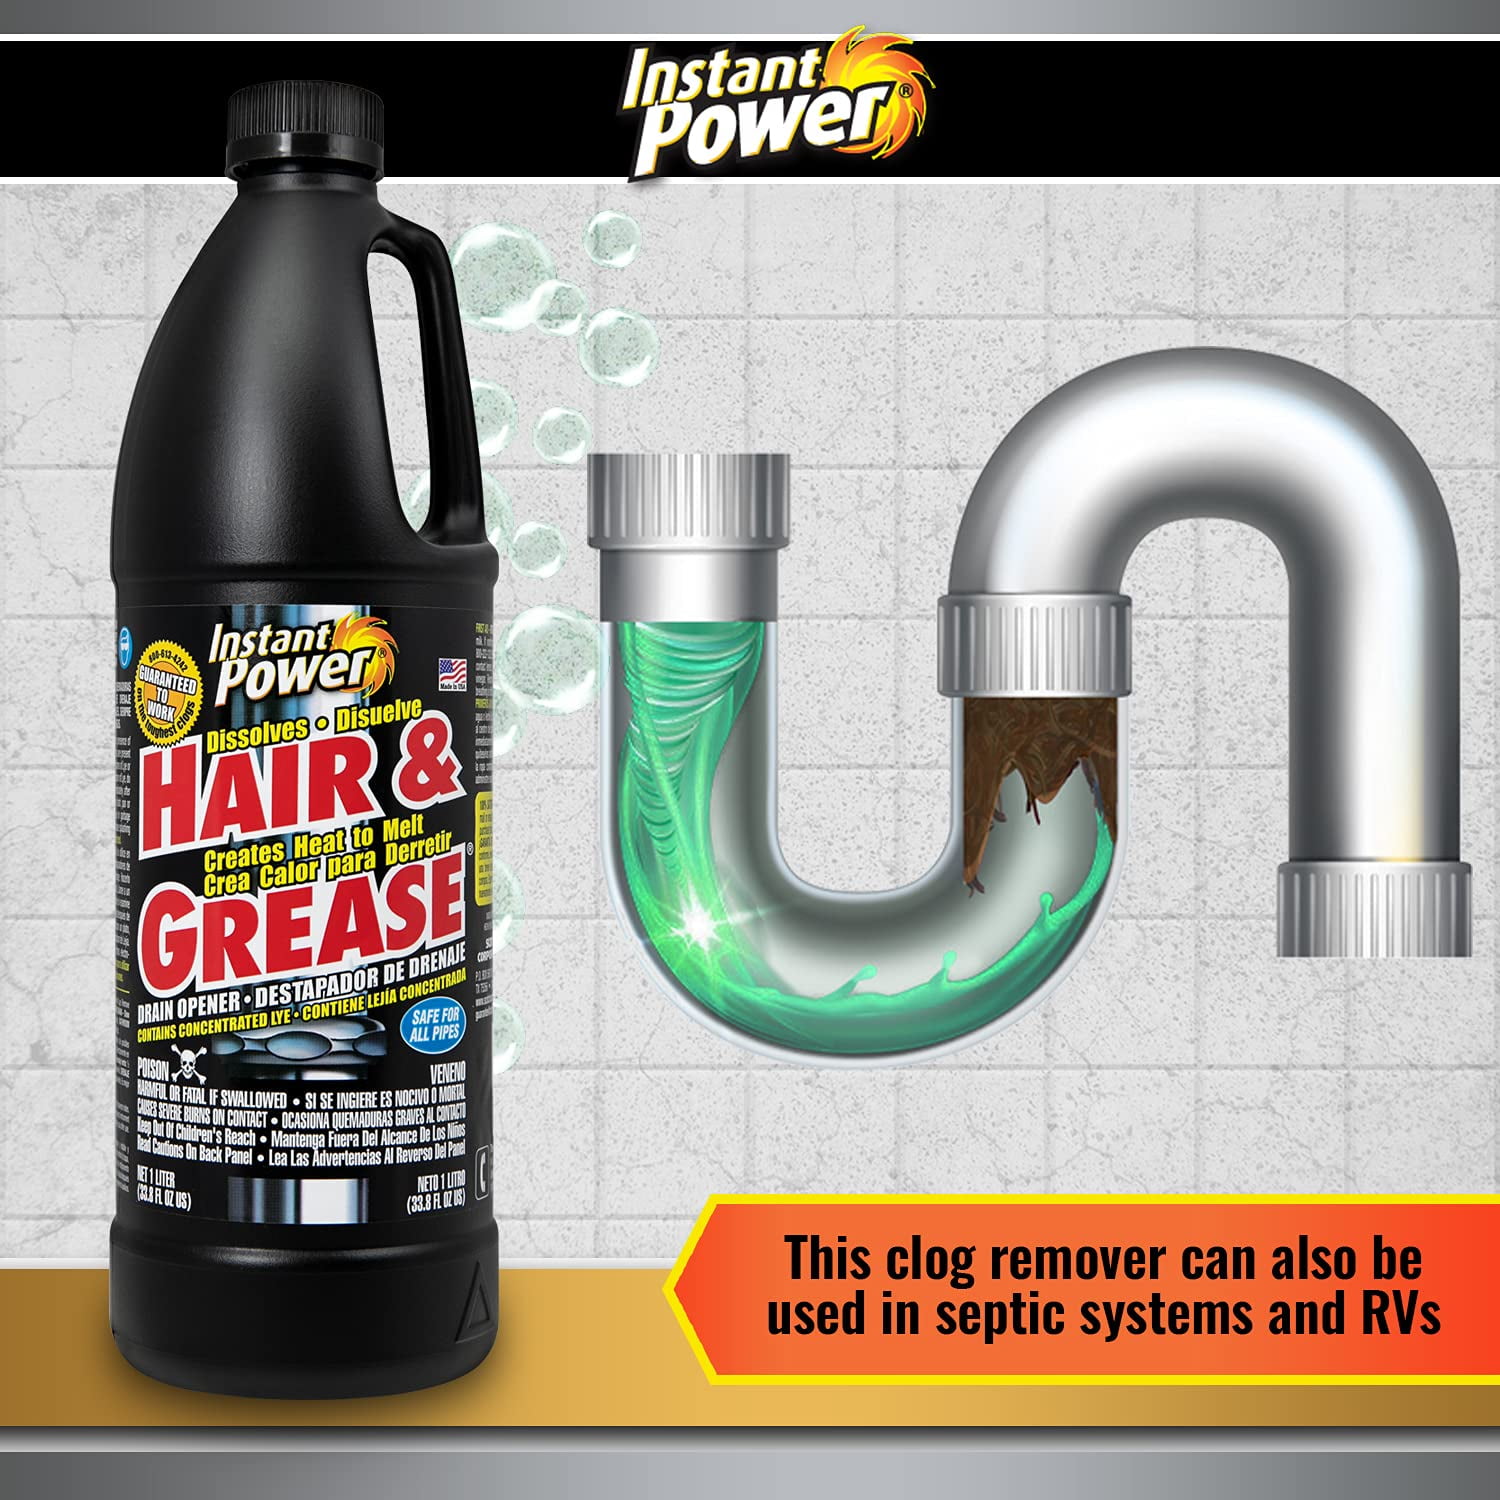 Instant Power 33.8 oz. Hair and Grease Drain Cleaner 1969 - The